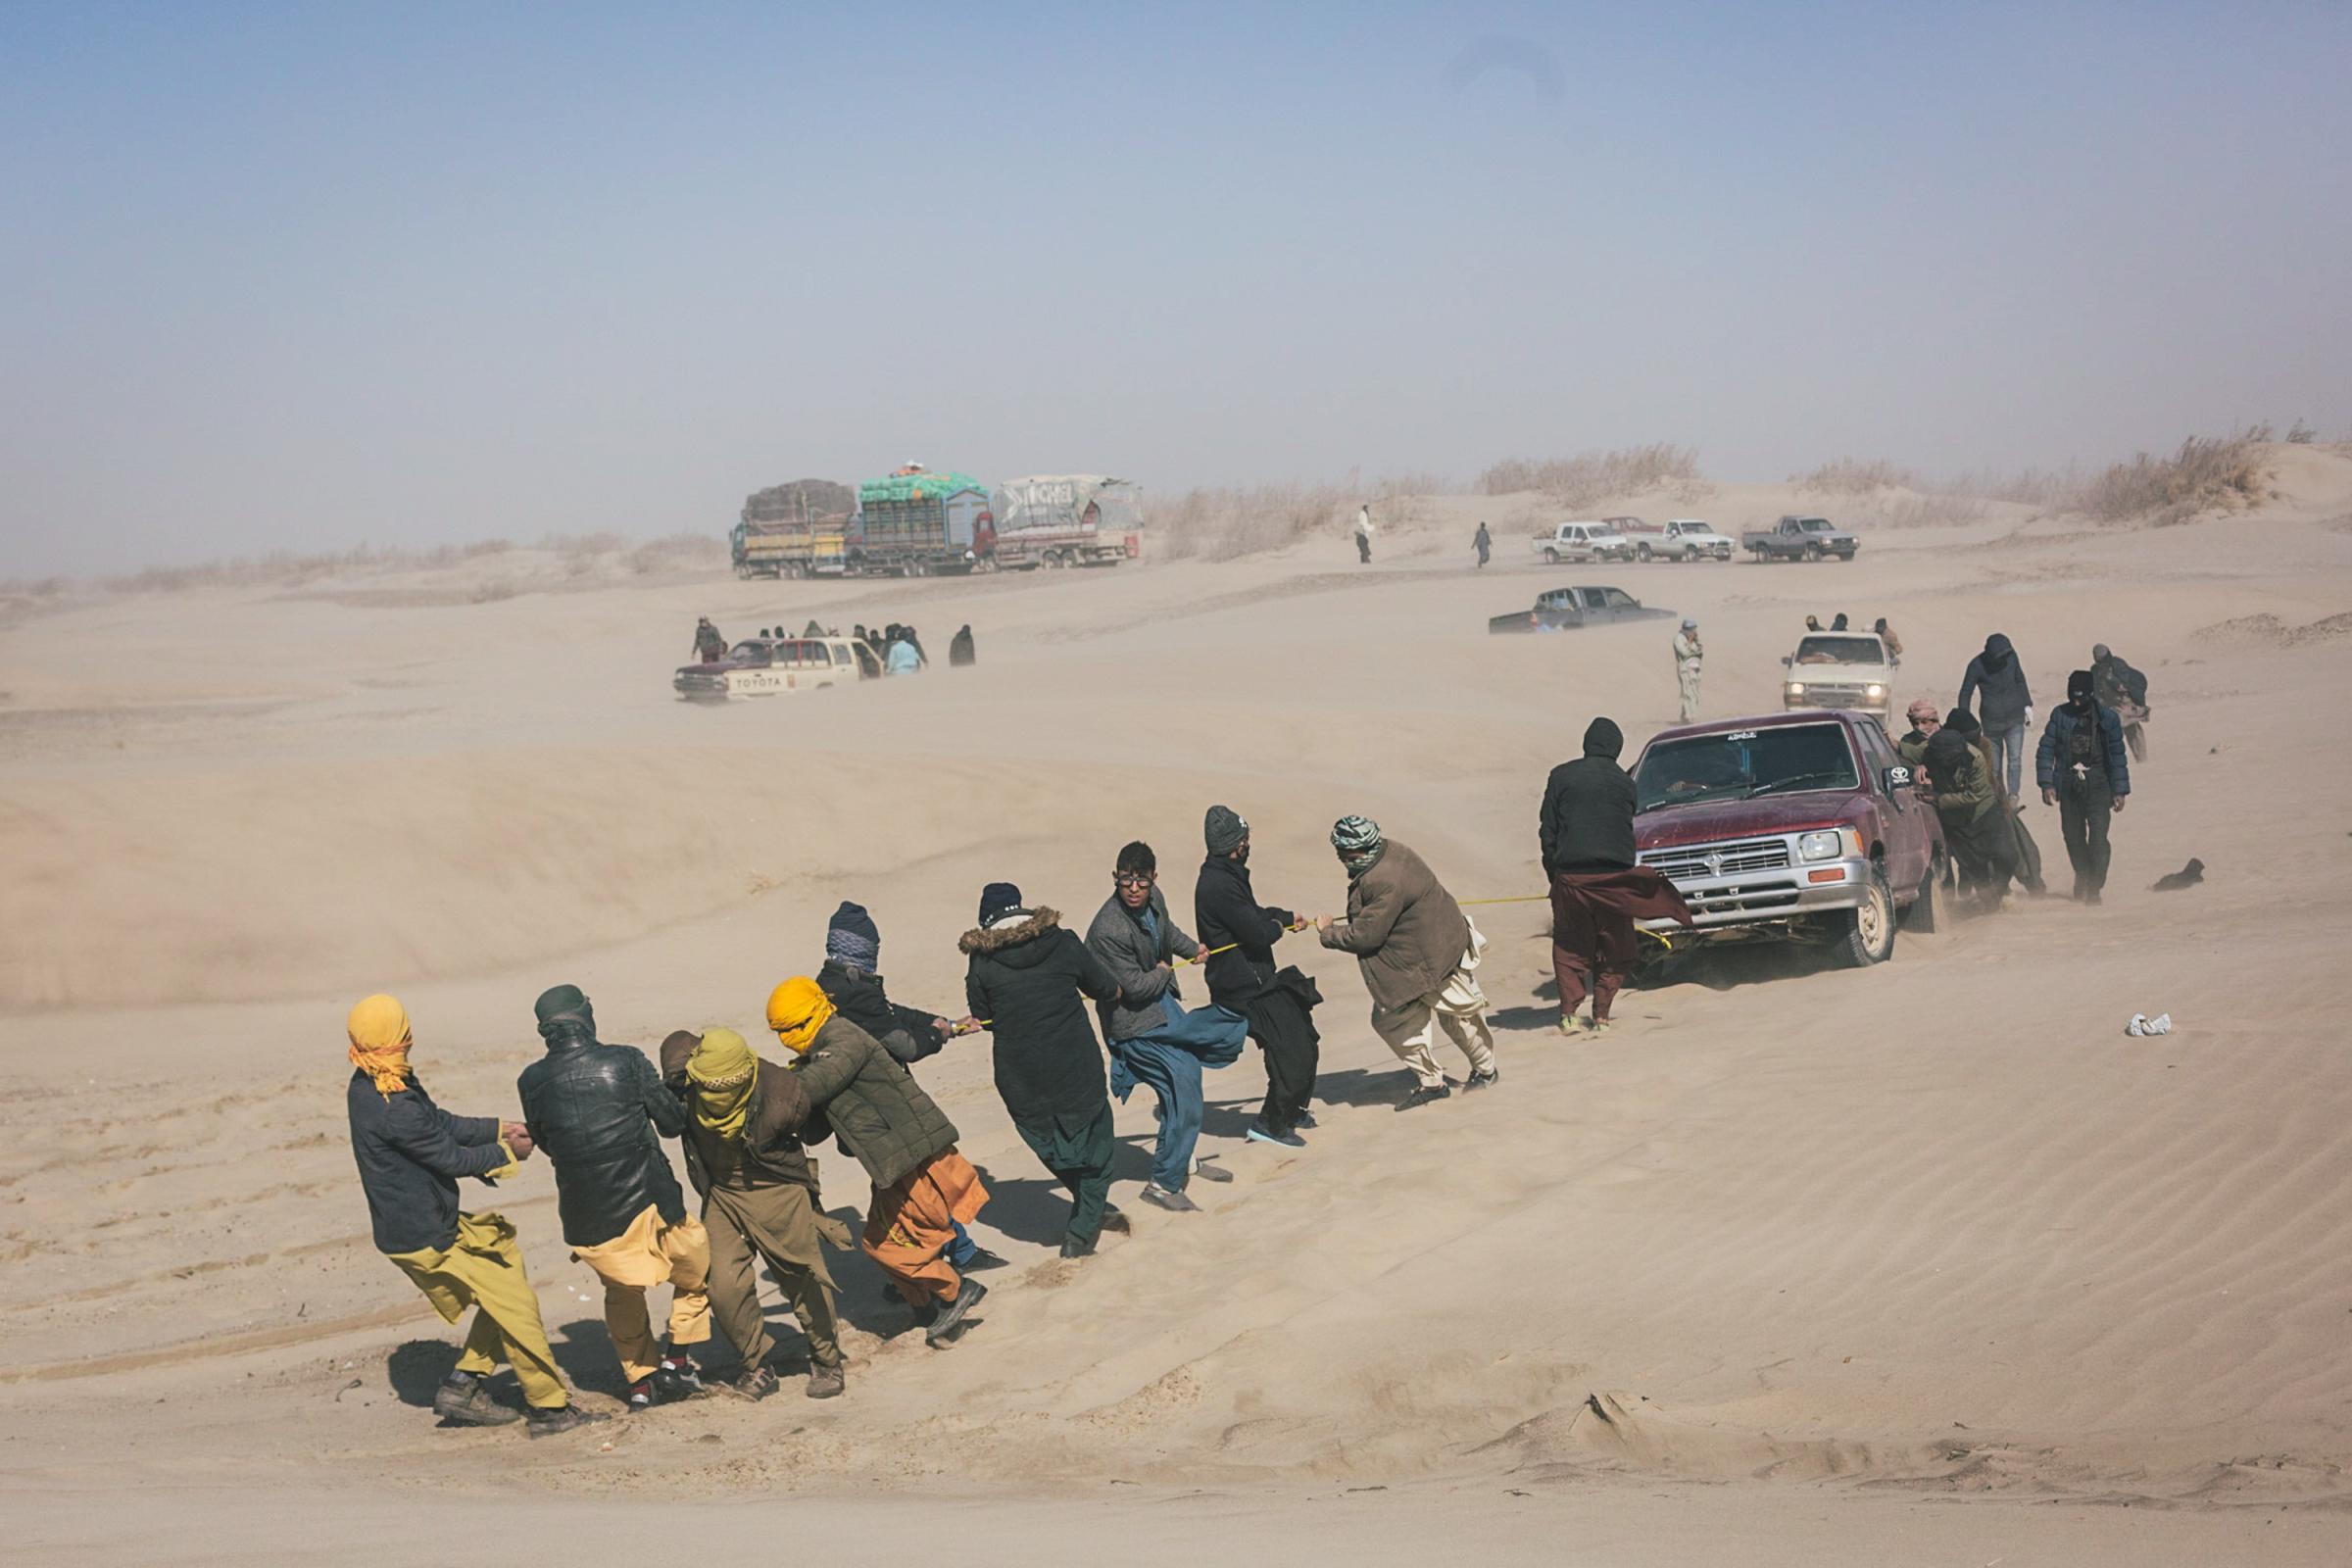 An Afghan Exodus - Afghan refugees pull pick-ups out of the desert sand.